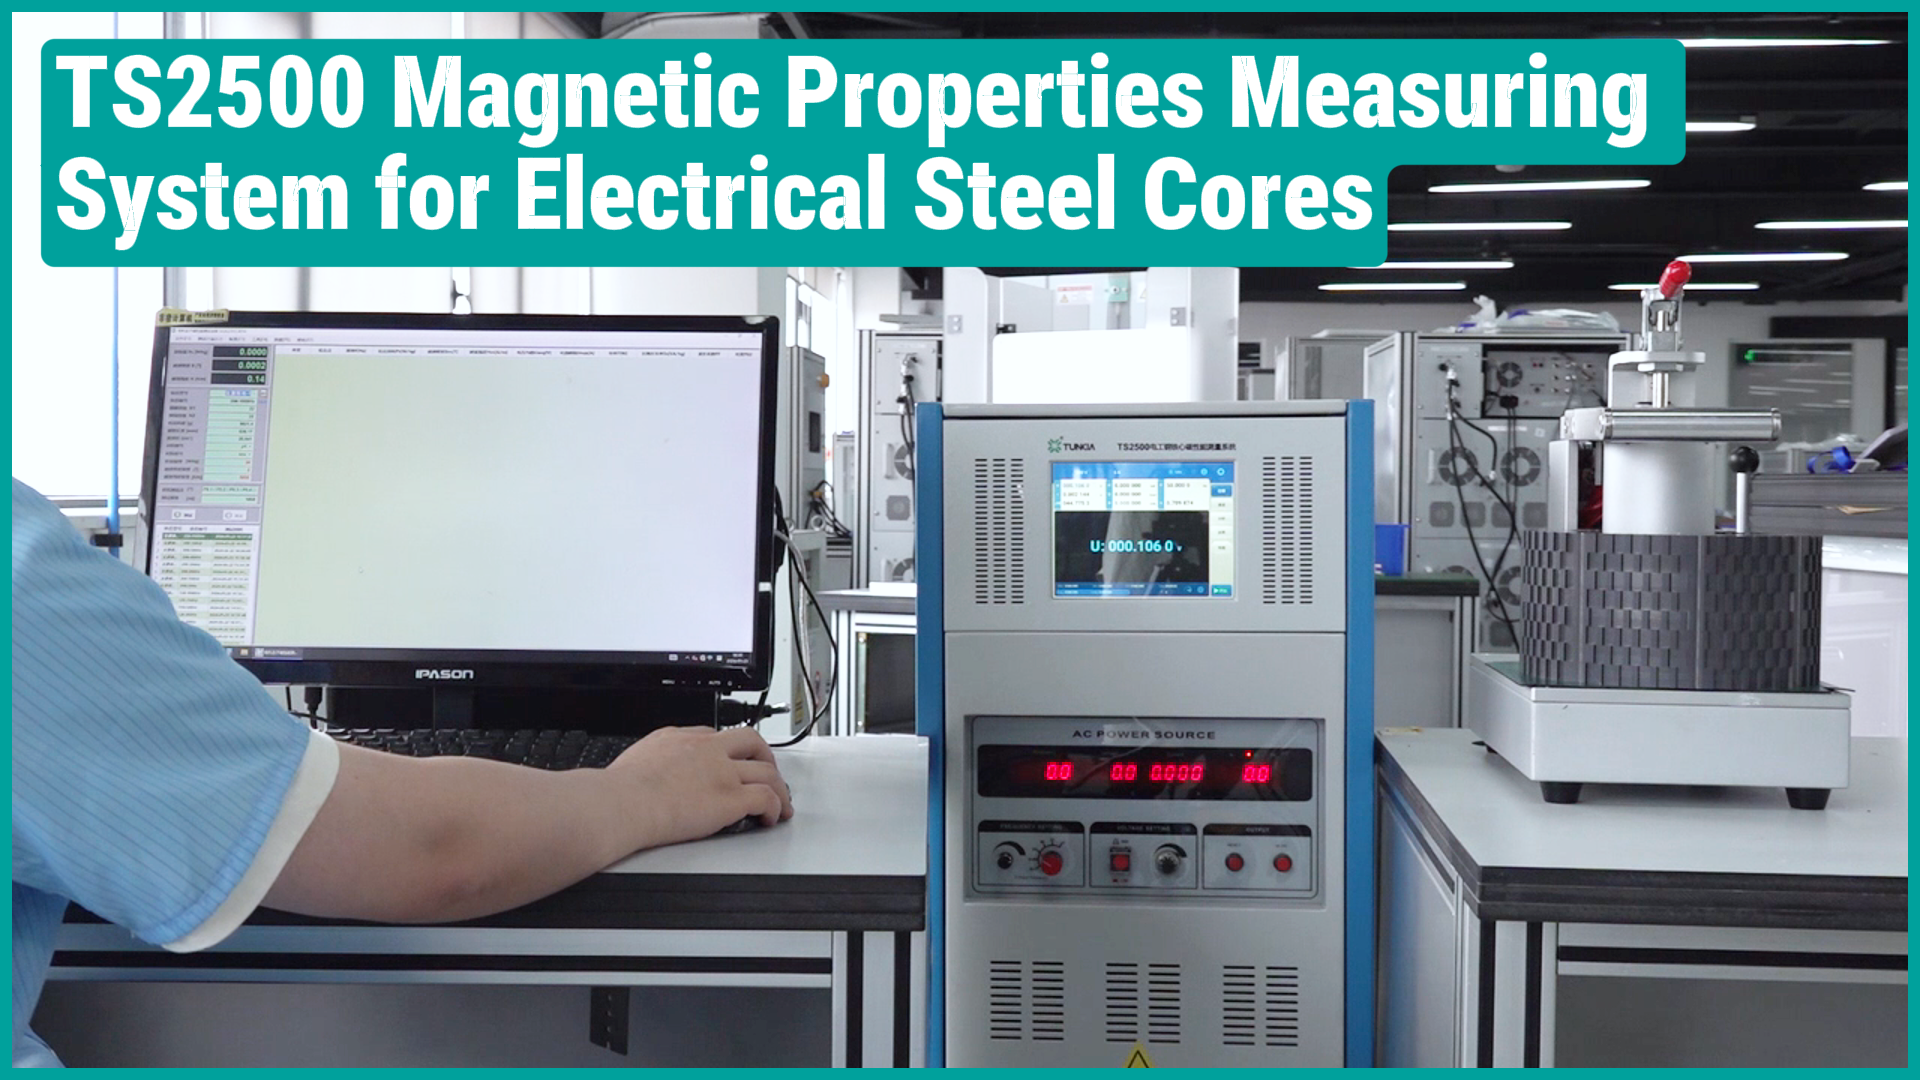 TS2500 Magnetic Properties Measuring System for Electrical Steel Cores